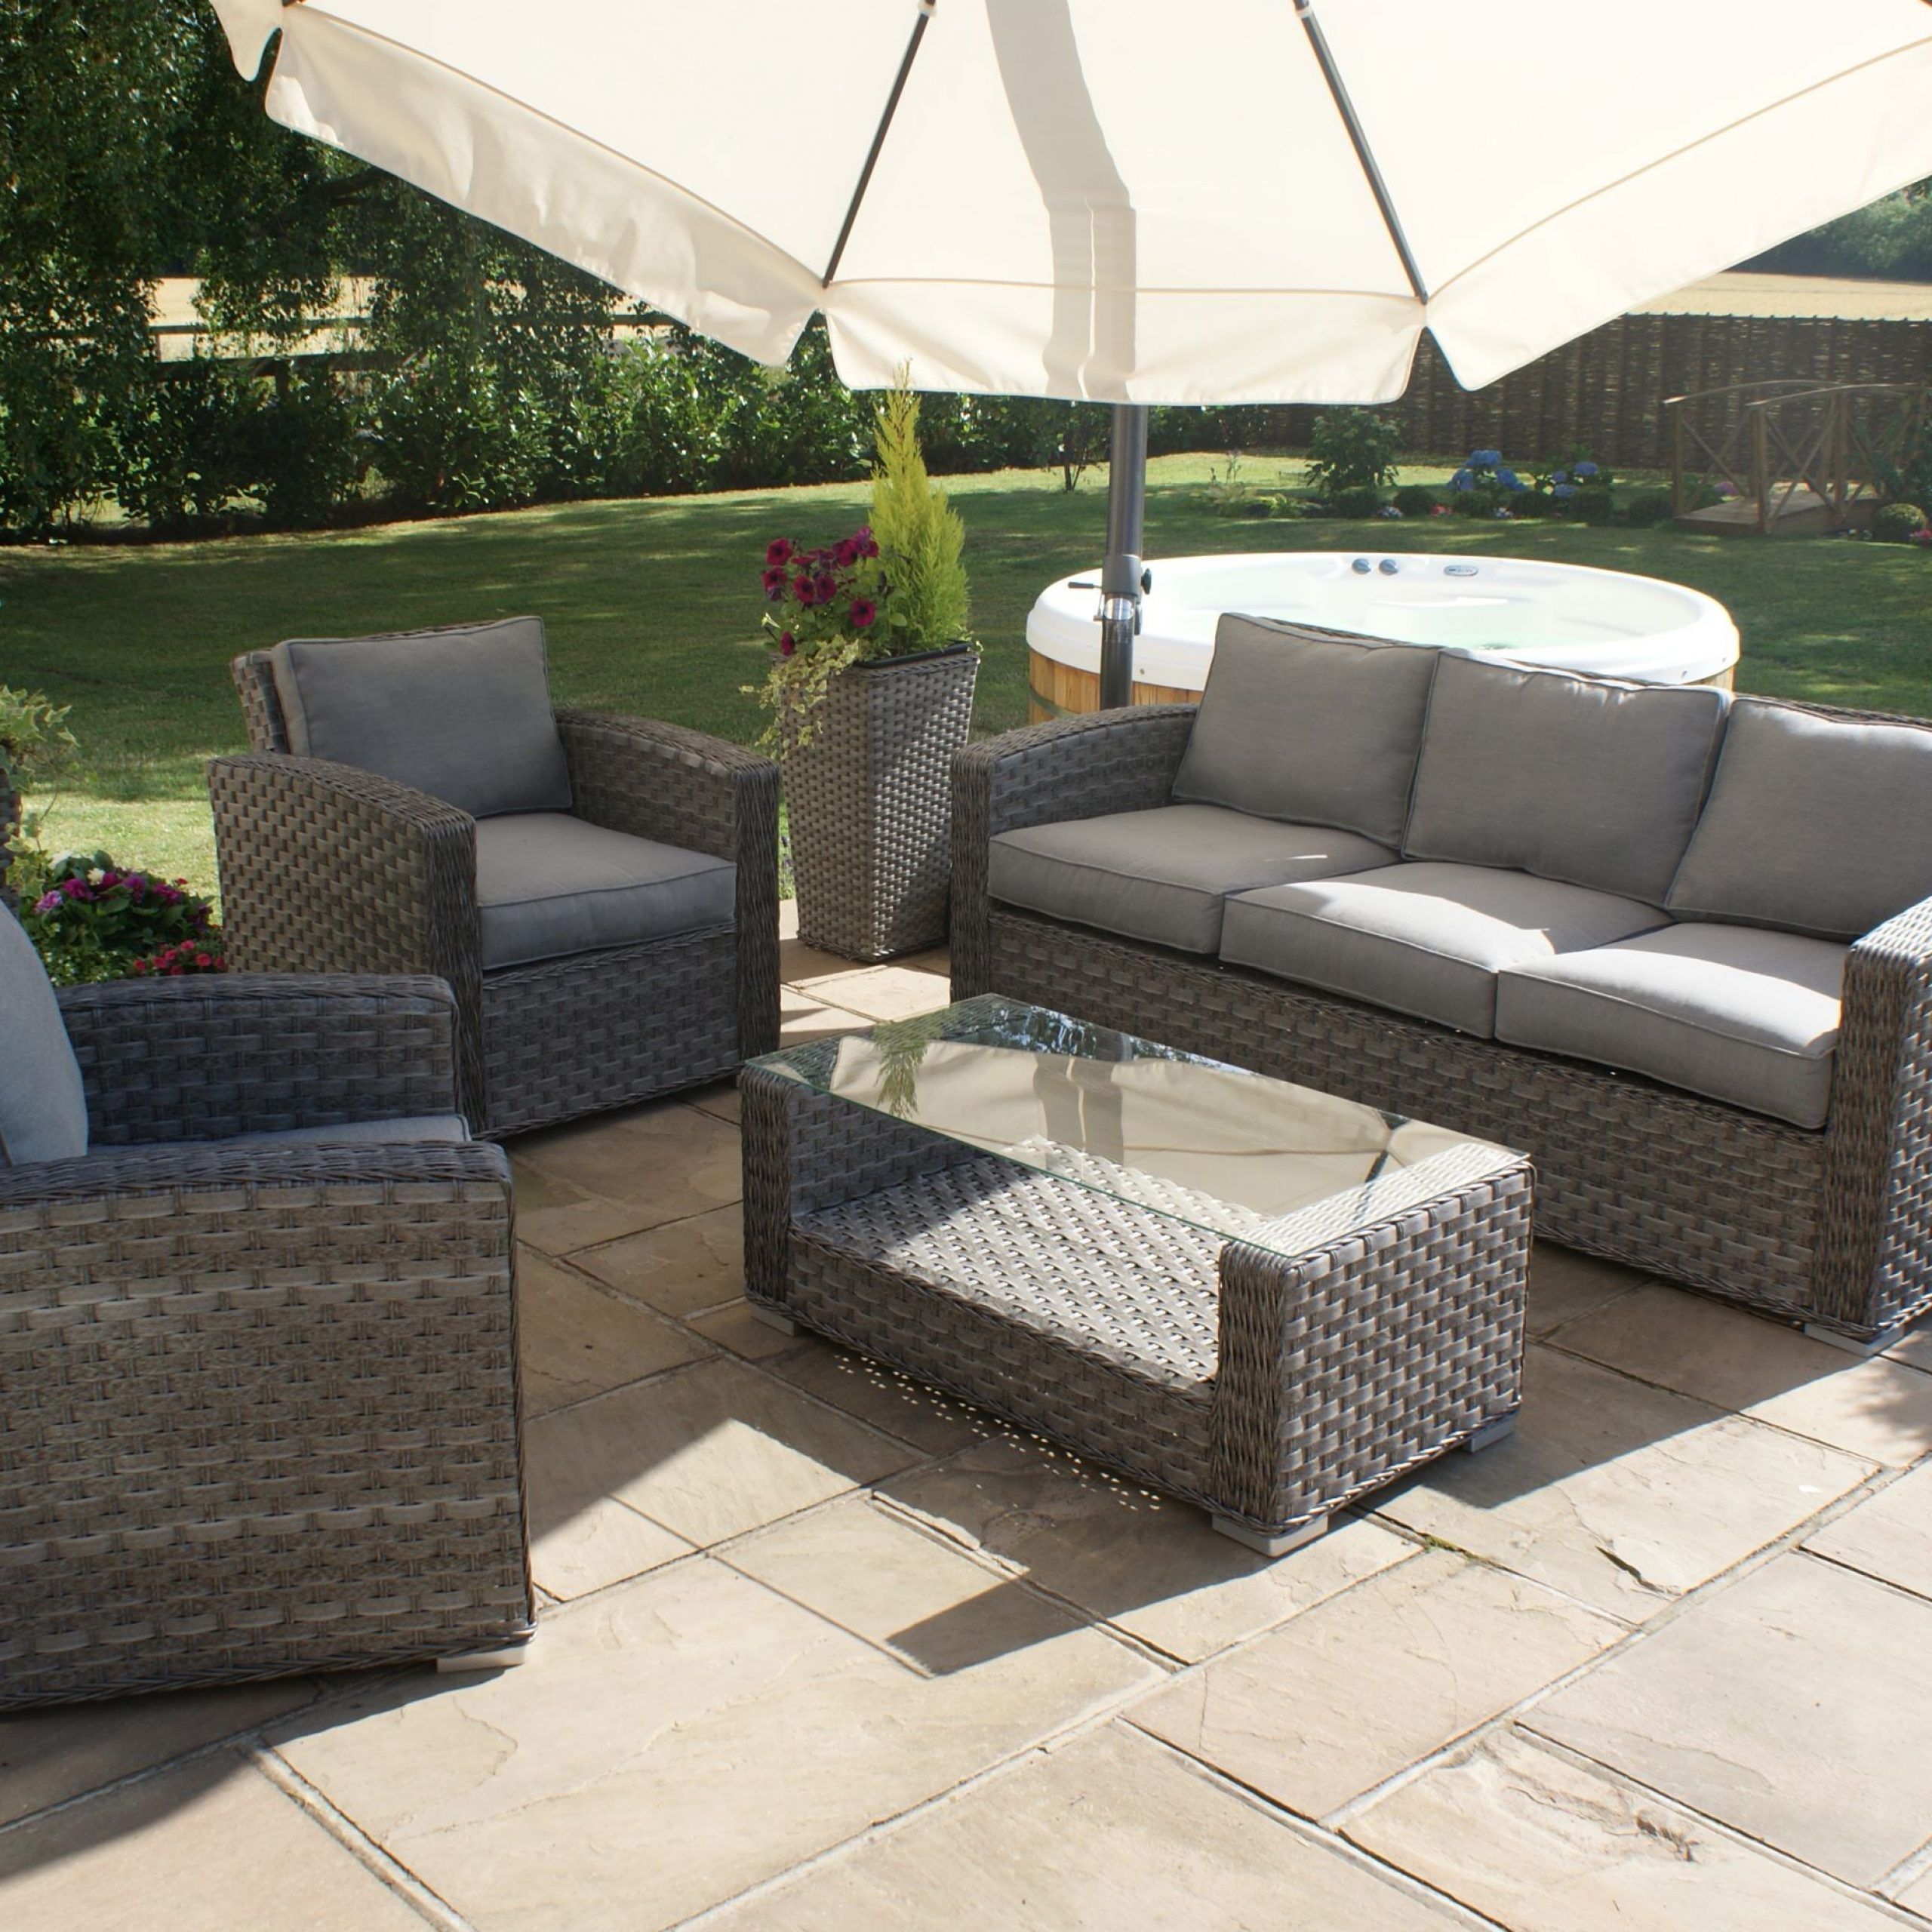 Maze Rattan Victoria 3 Seat Garden Sofa Set | Rattan Furniture Fairy With Regard To Outdoor Seating Sectional Patio Sets (View 6 of 15)